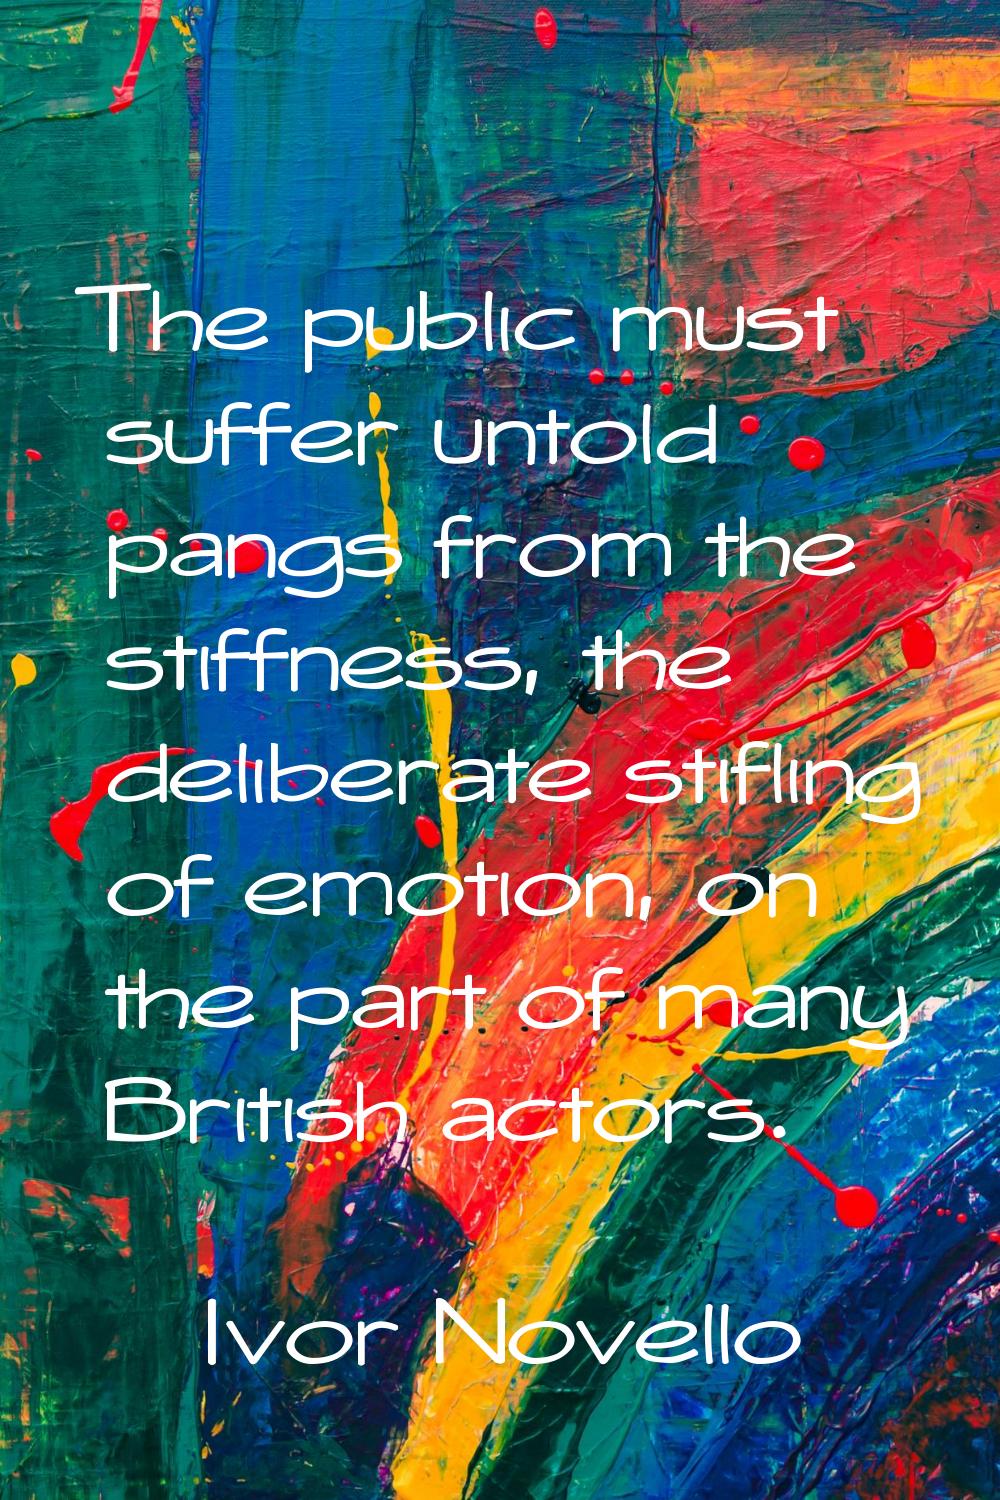 The public must suffer untold pangs from the stiffness, the deliberate stifling of emotion, on the 